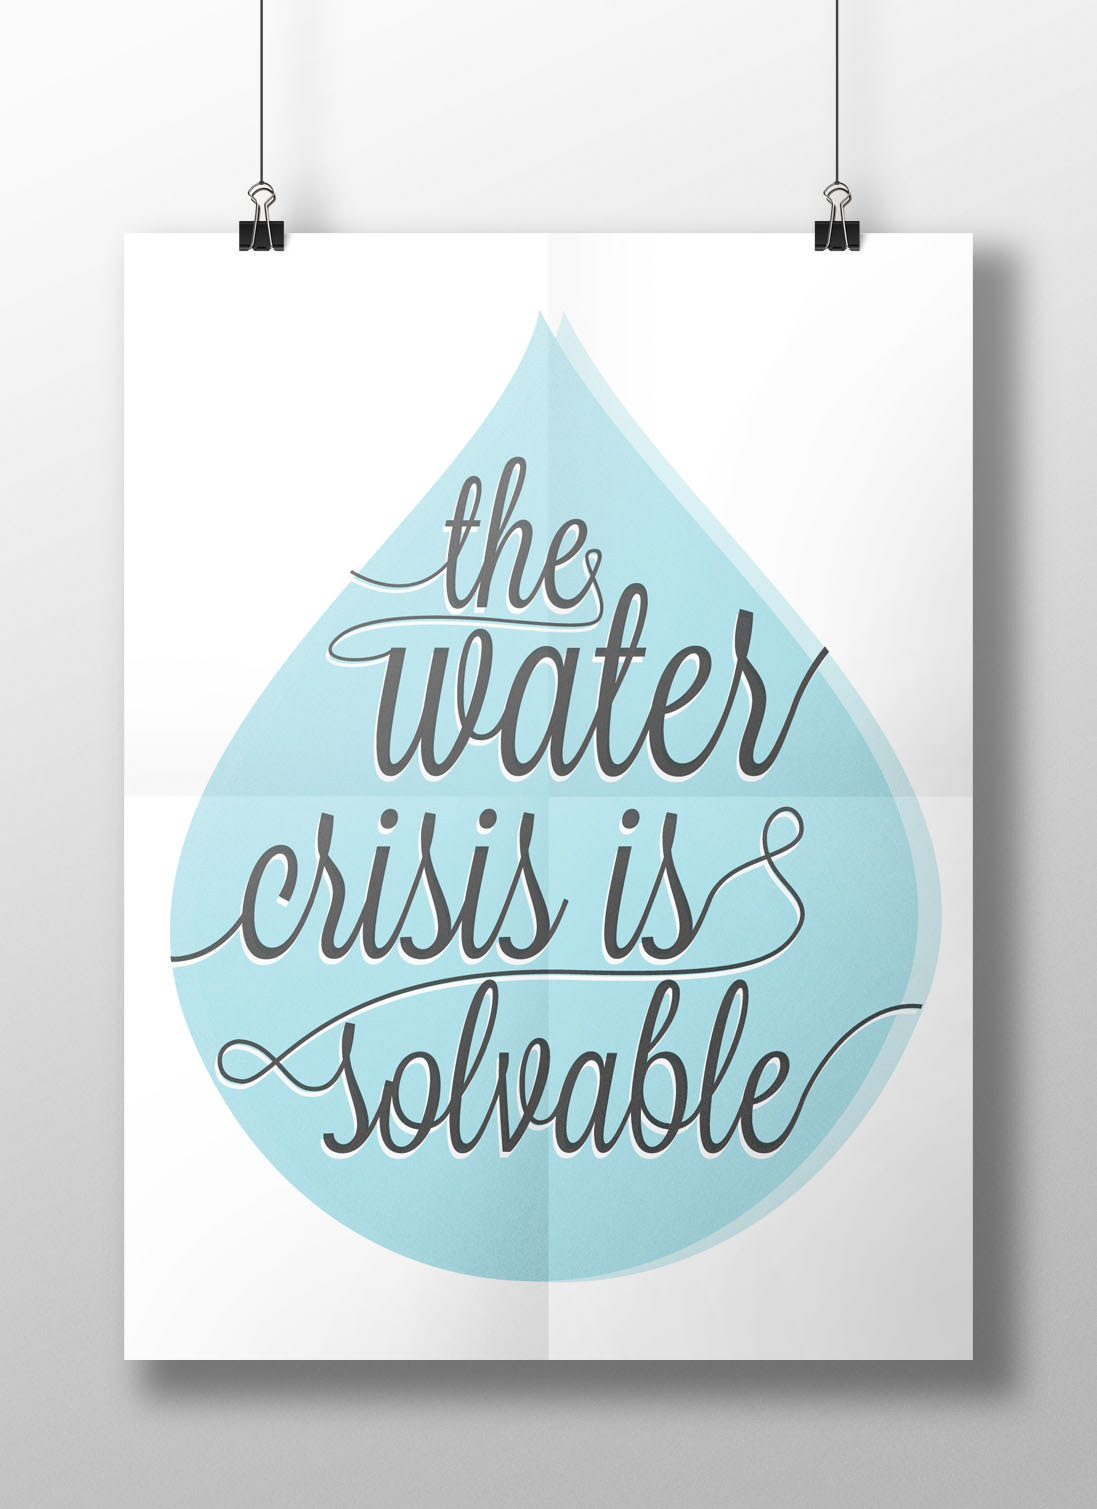 adobe illustrator Adobe Photoshop Clean Water poster Cause water glass